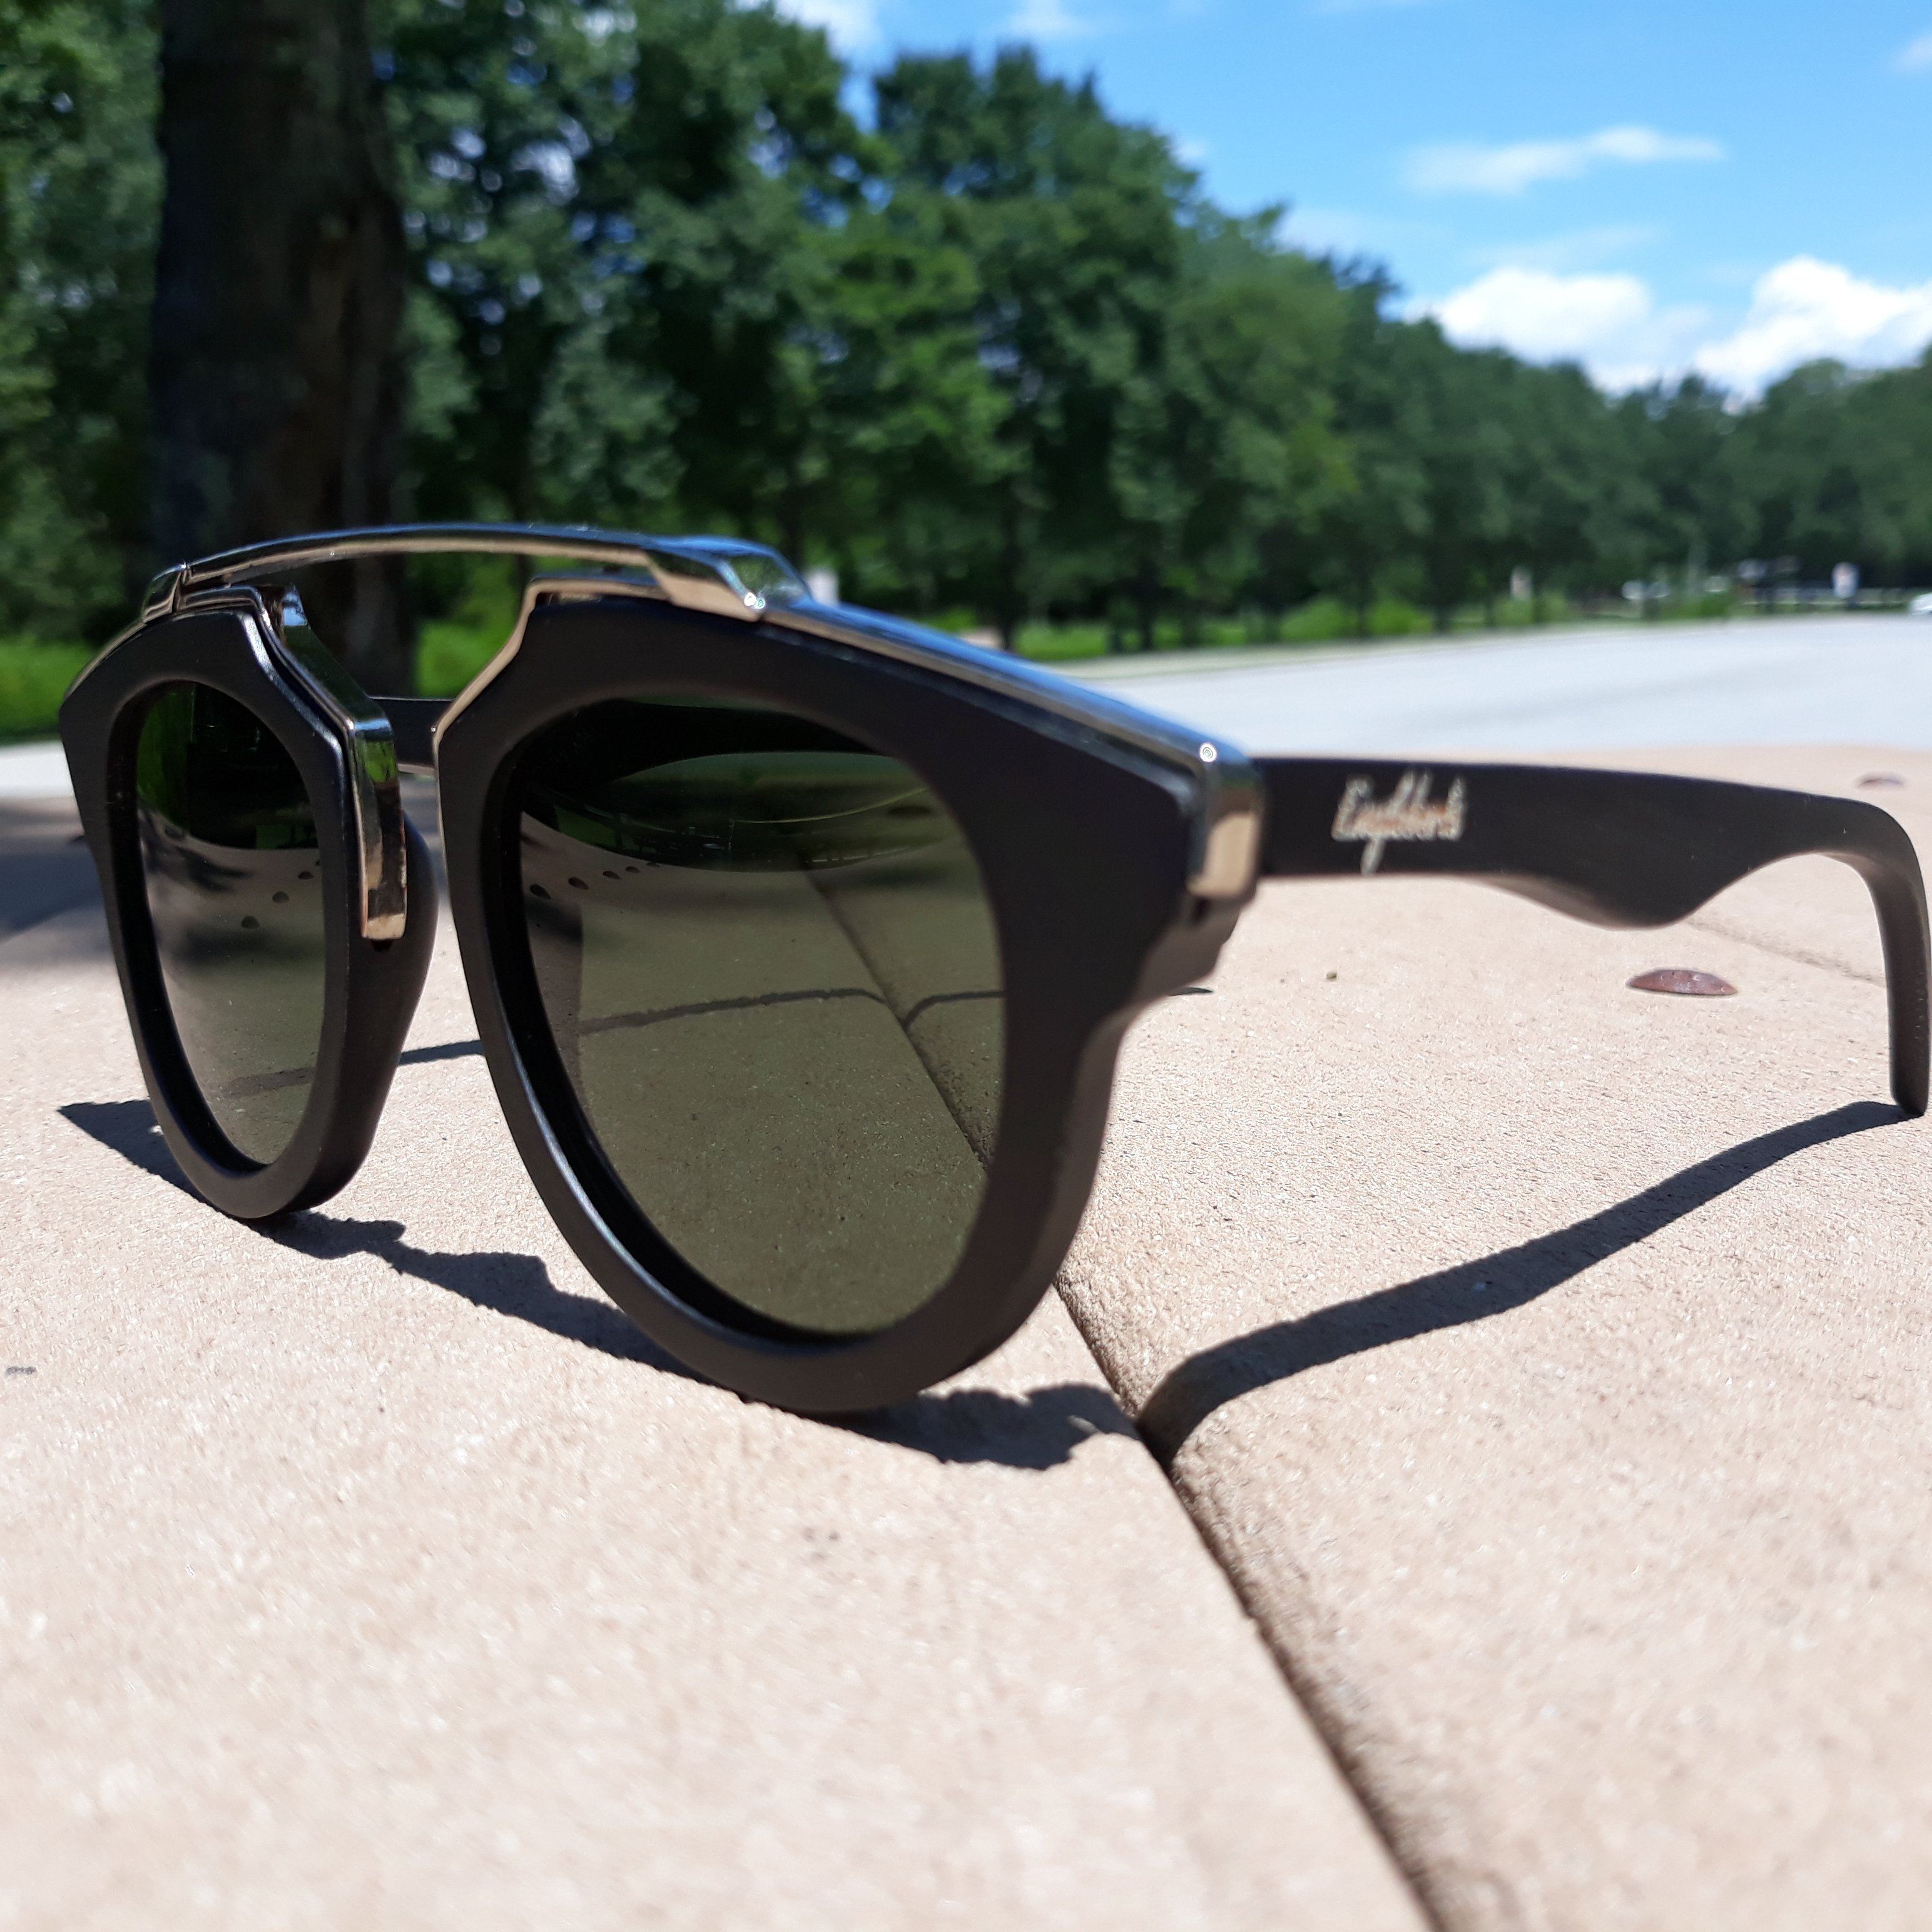 Black Wood and Silver Trim Sunglasses, G15 Lenses with Bamboo Case Sunglasses 